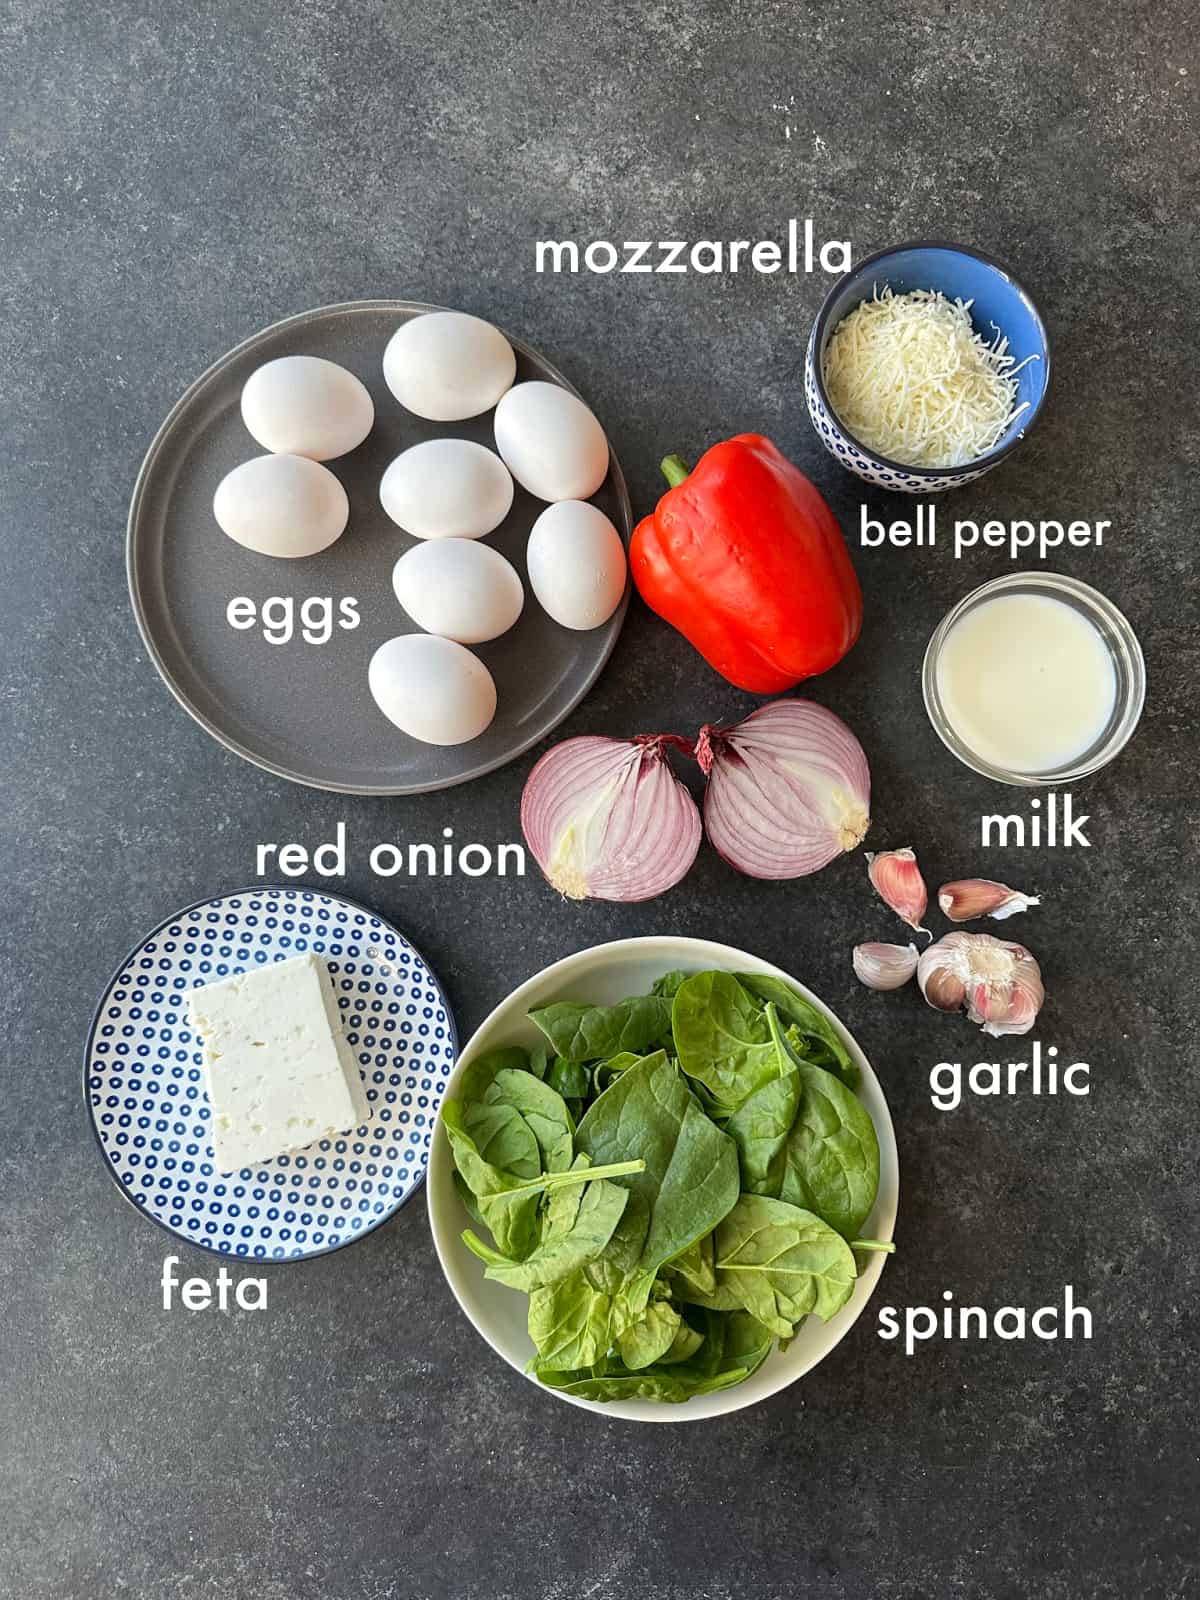 To make this recipe you need eggs, cheese, spinach, onion, peppers and milk. 